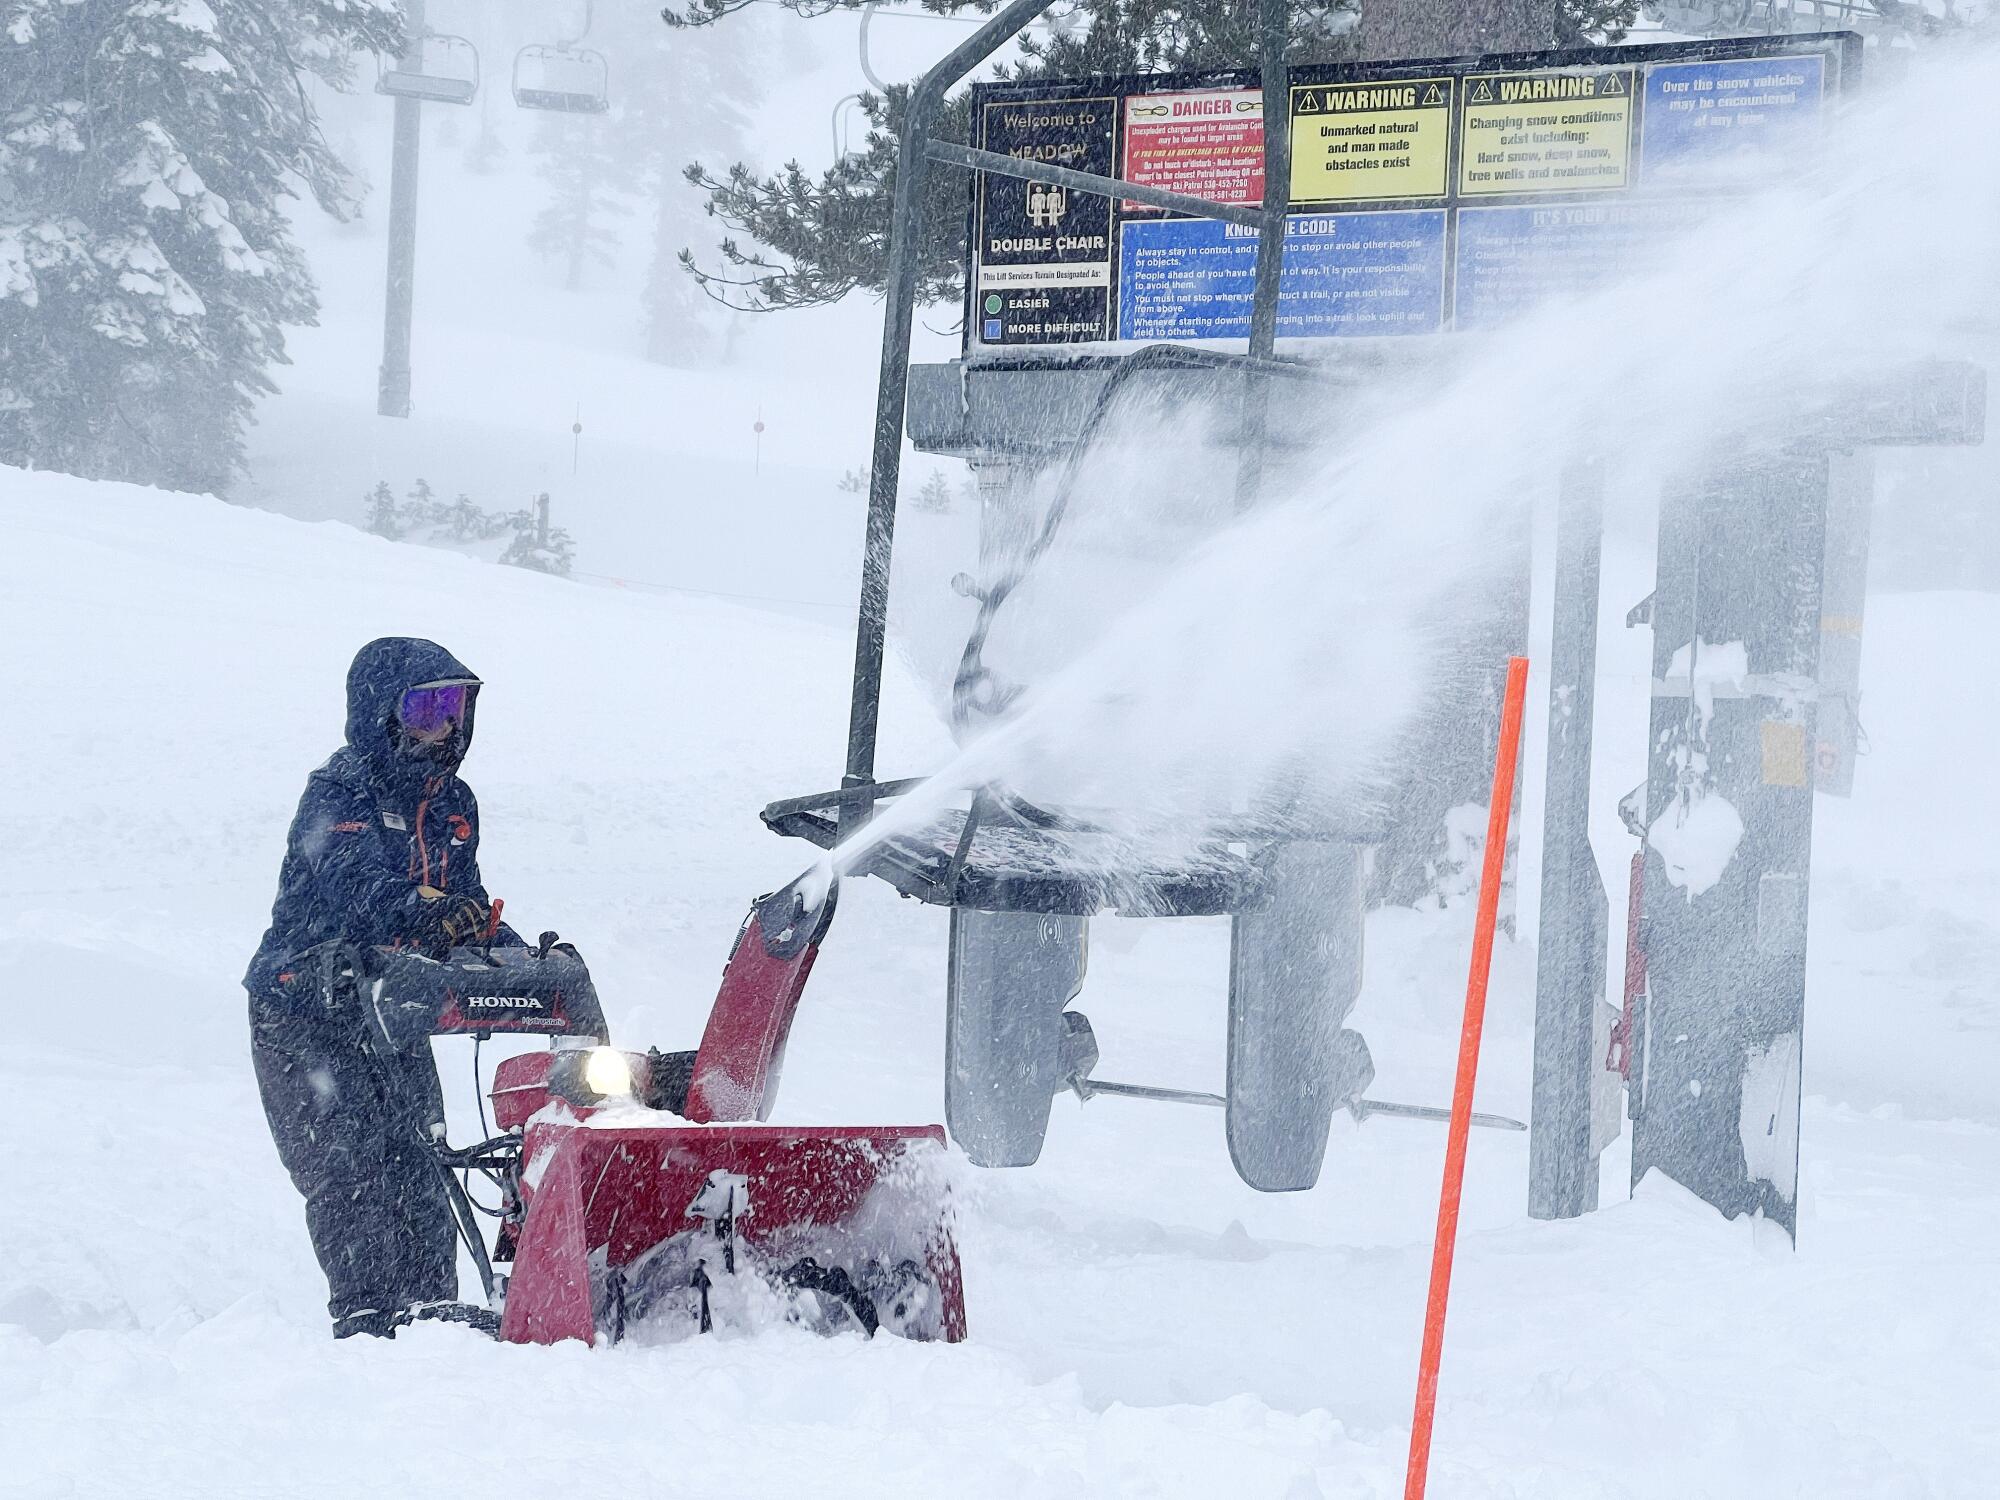 An employee uses a snow blower to clear snow at a ski resort near a ski lift chair.